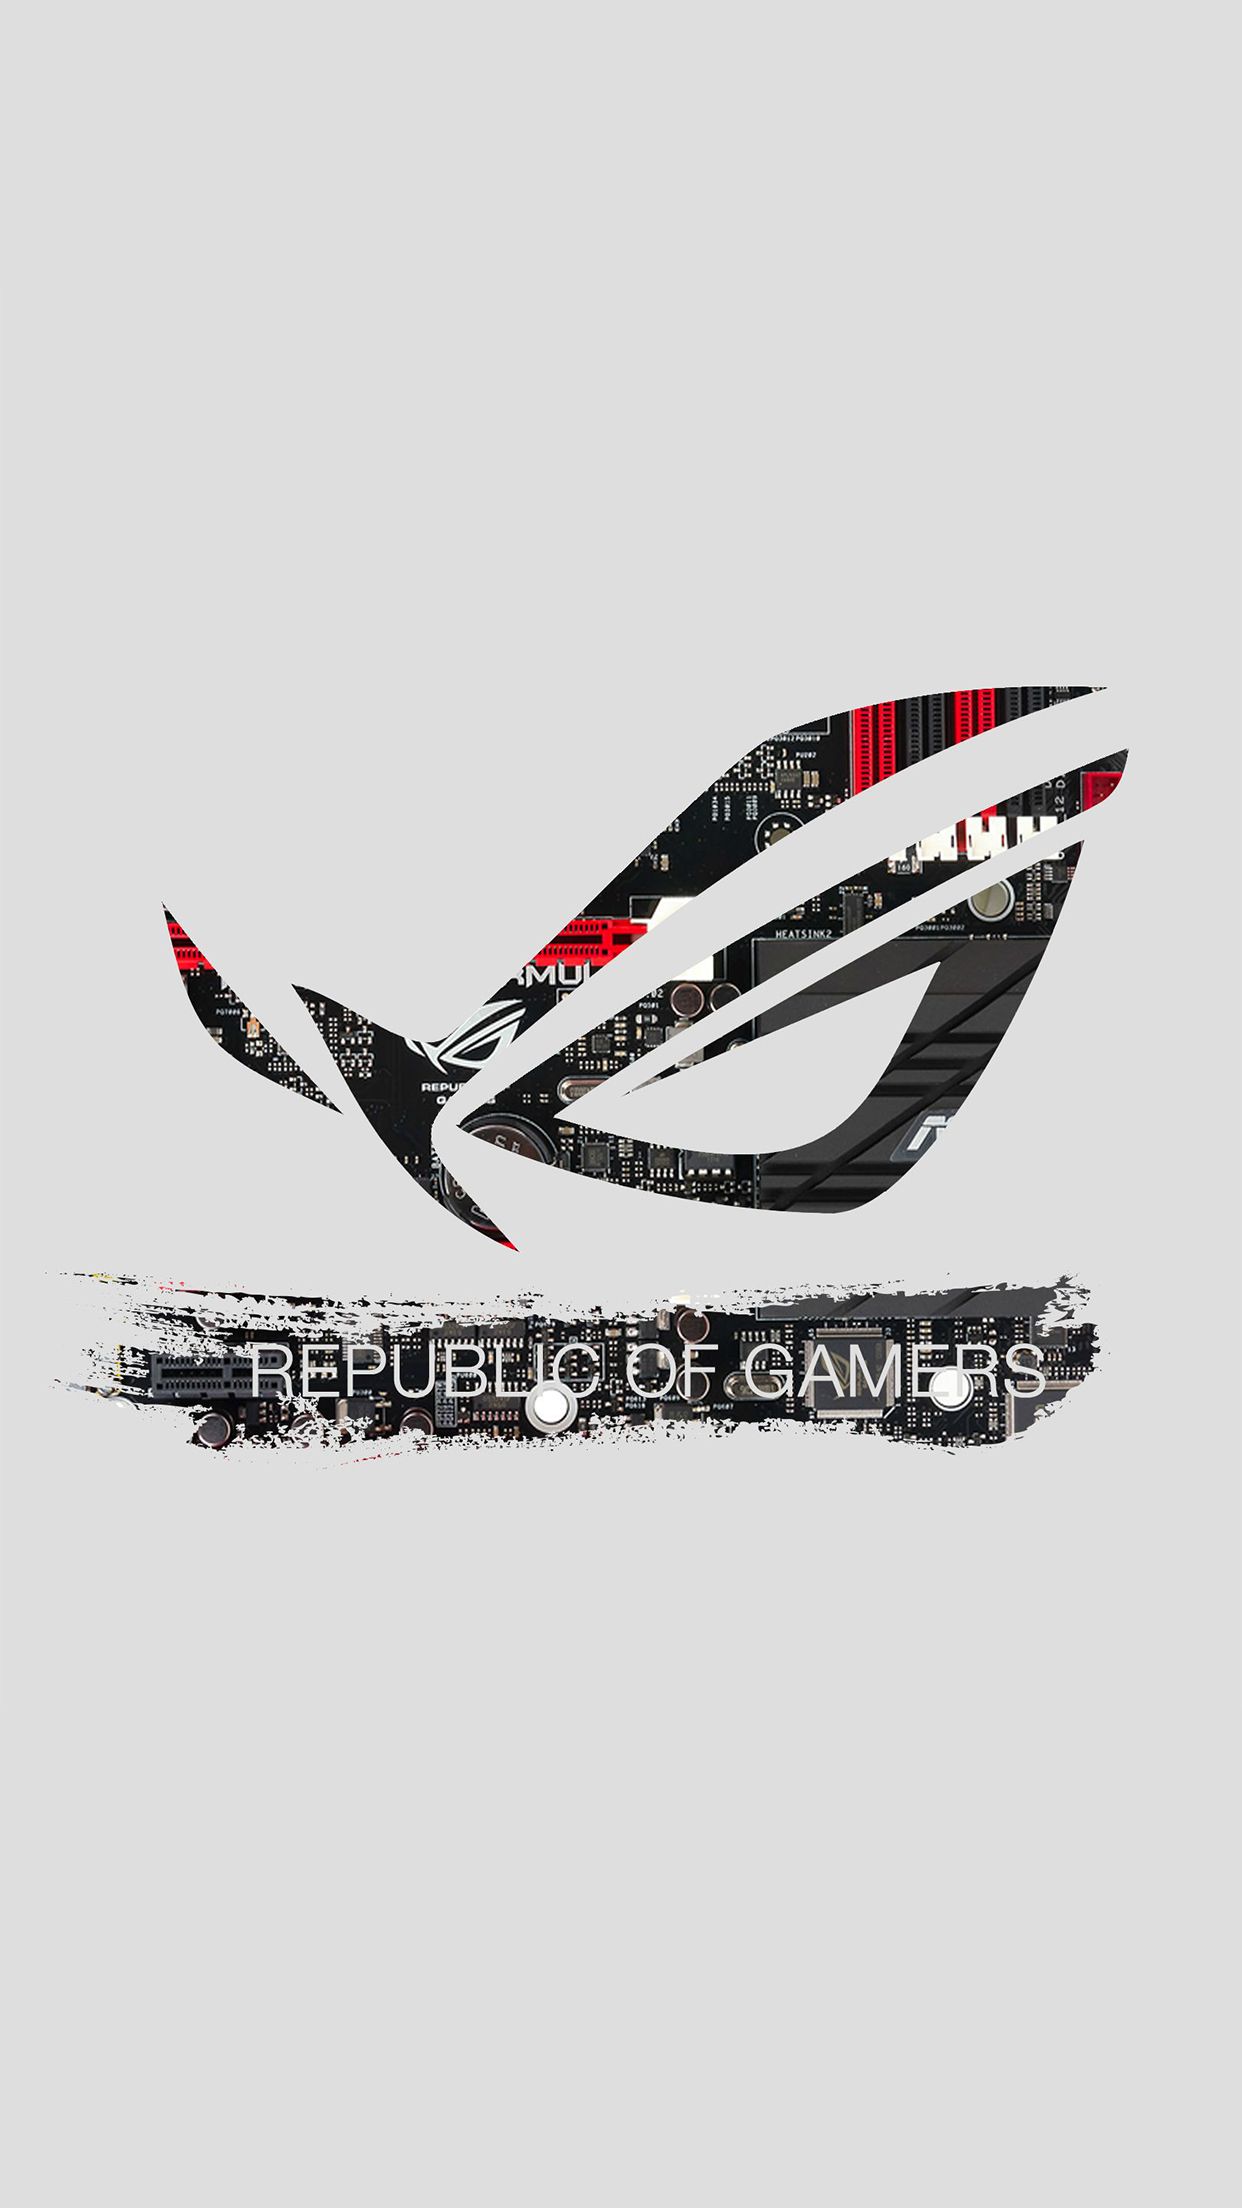 Asus ROG Logo Wallpaper for iPhone Pro Max, X, 6